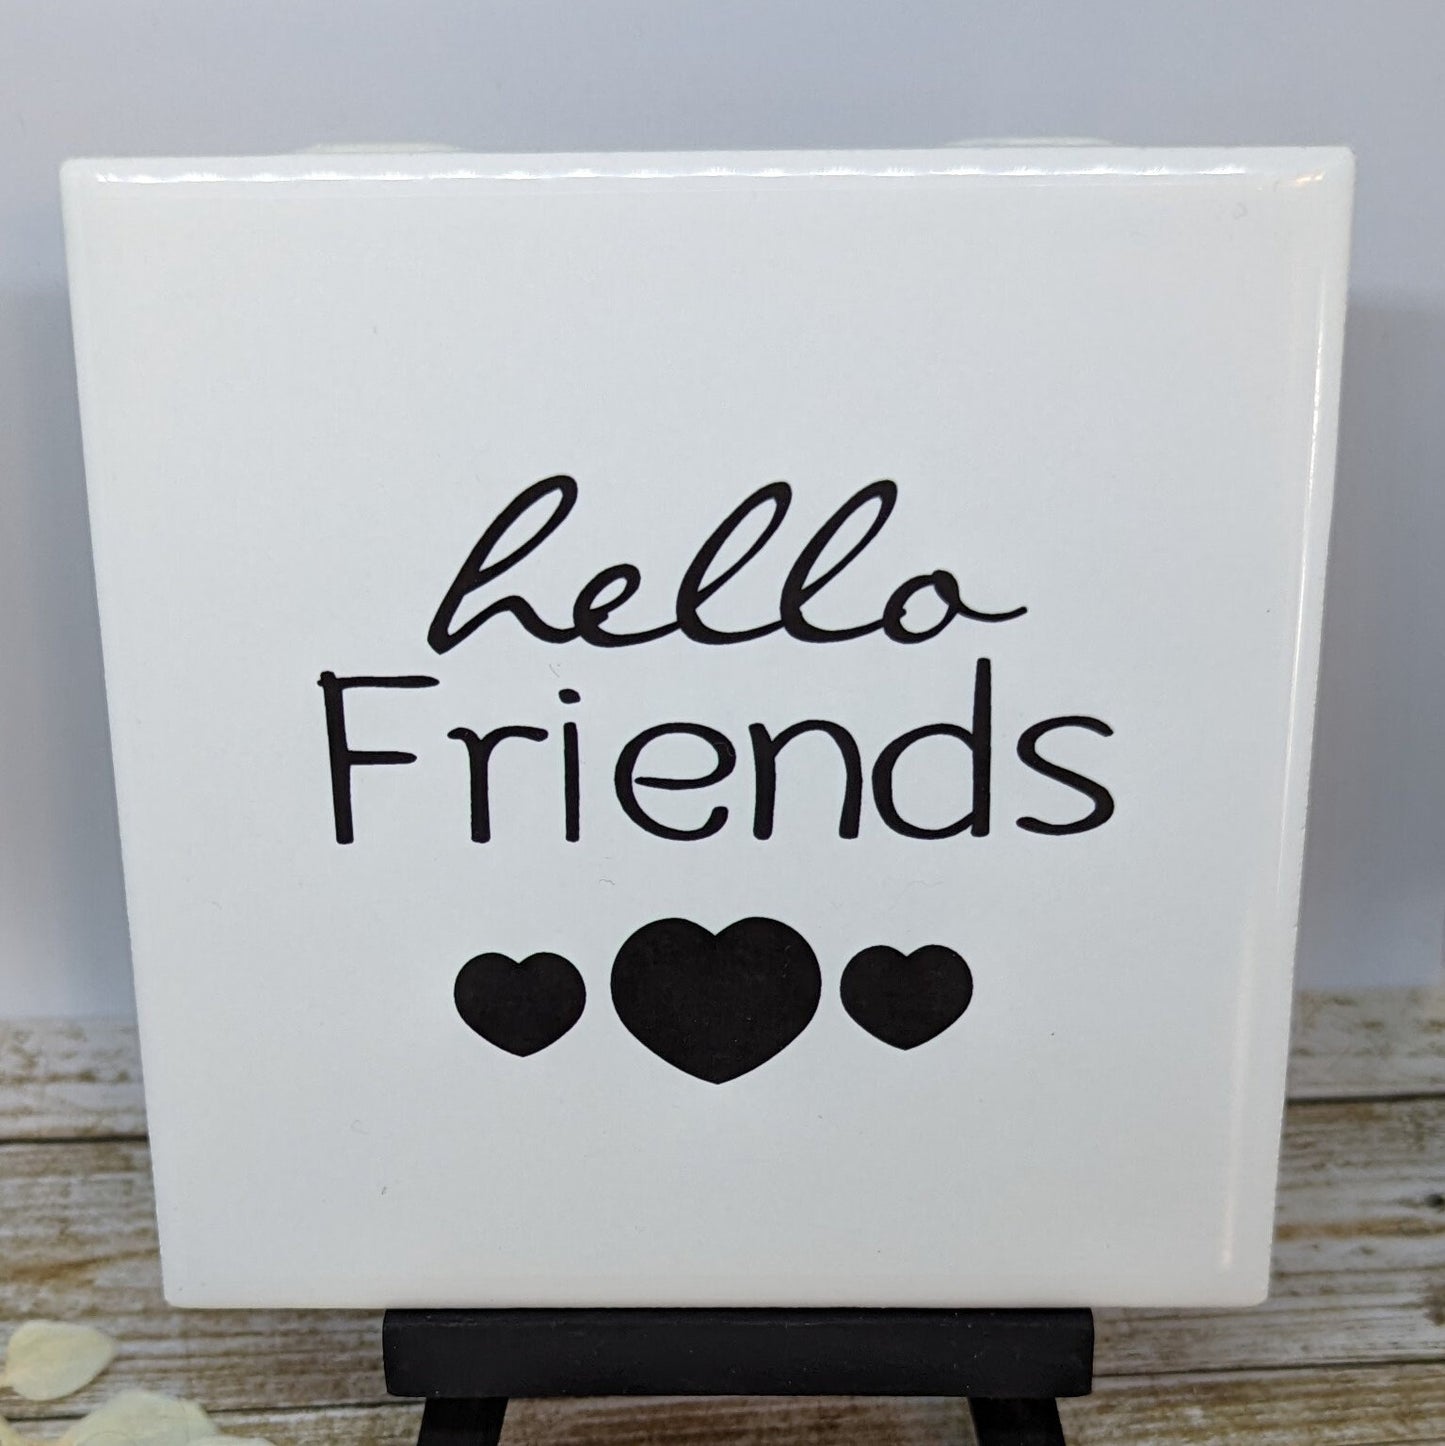 Hello Friends Mini Easel Sign - easel included, your color choice